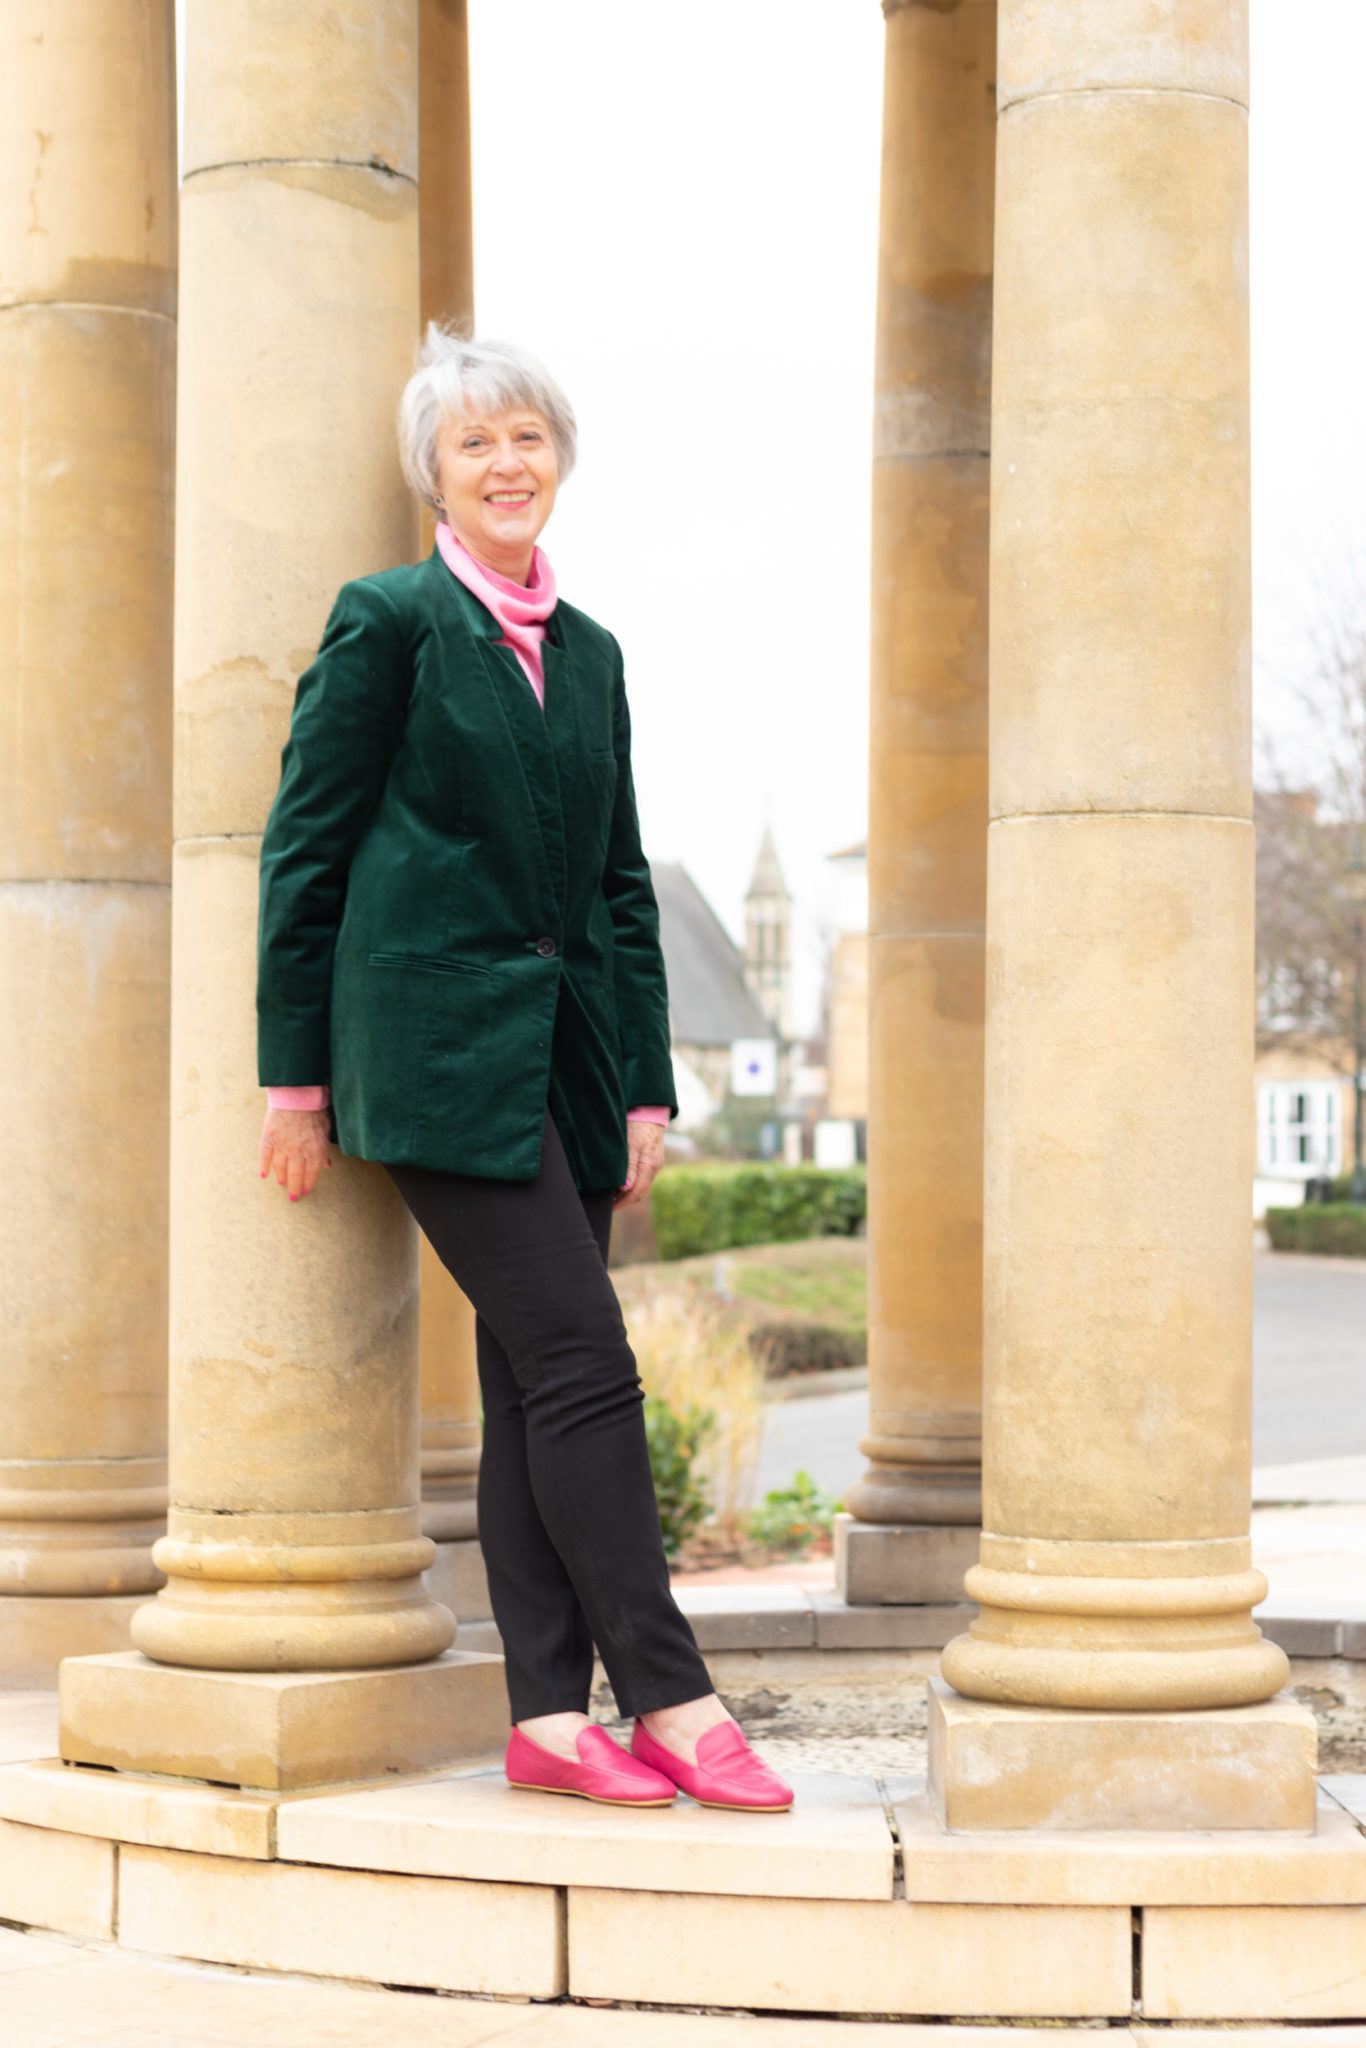 How to mix pink and green successfully - Chic at any age